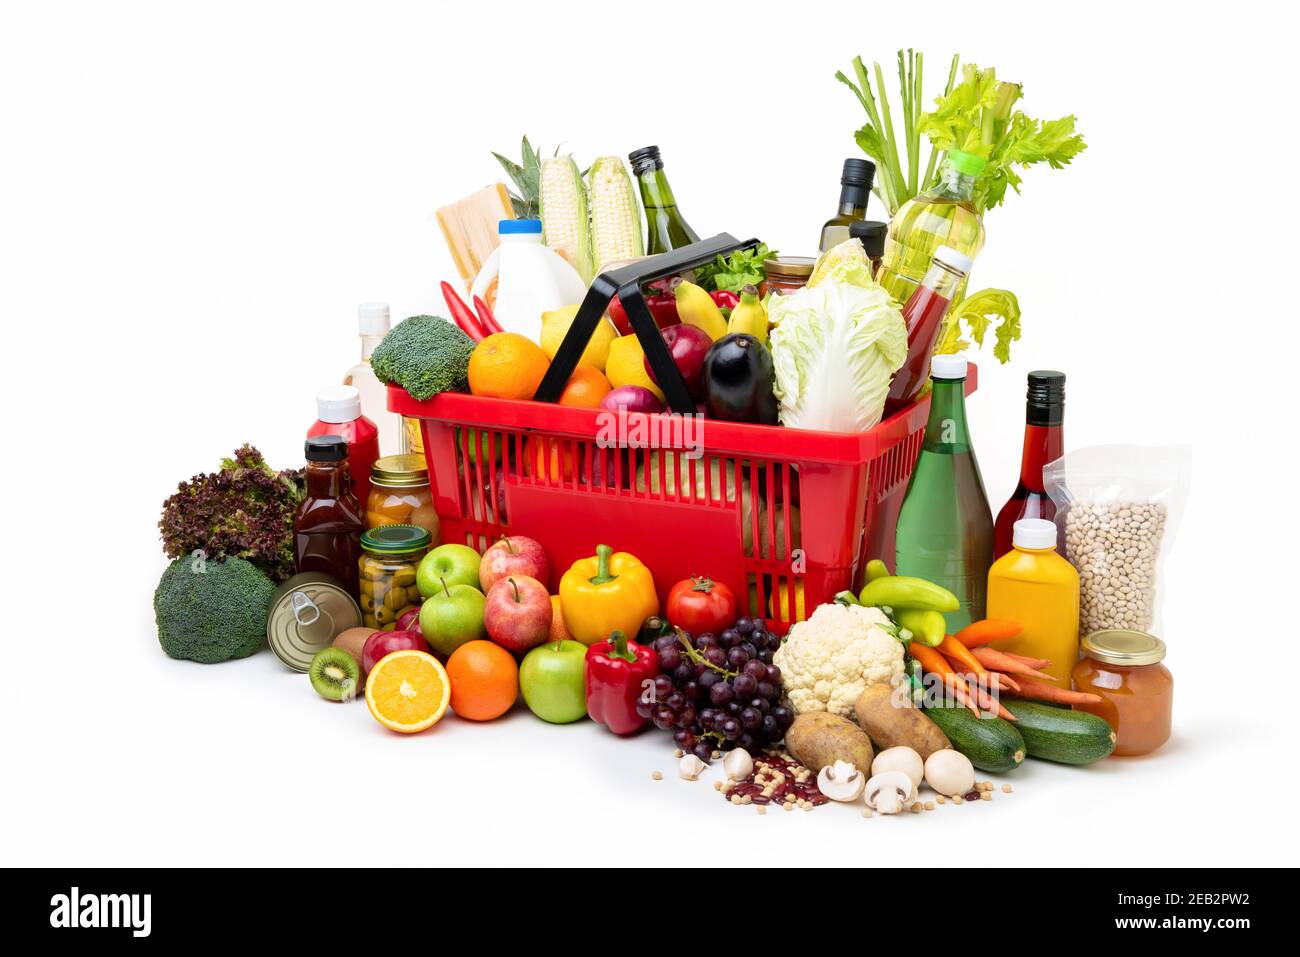 Red supermarket shopping basket full of  fresh organic colorful foods and groceries with assorted ingredients on white background Stock Photo